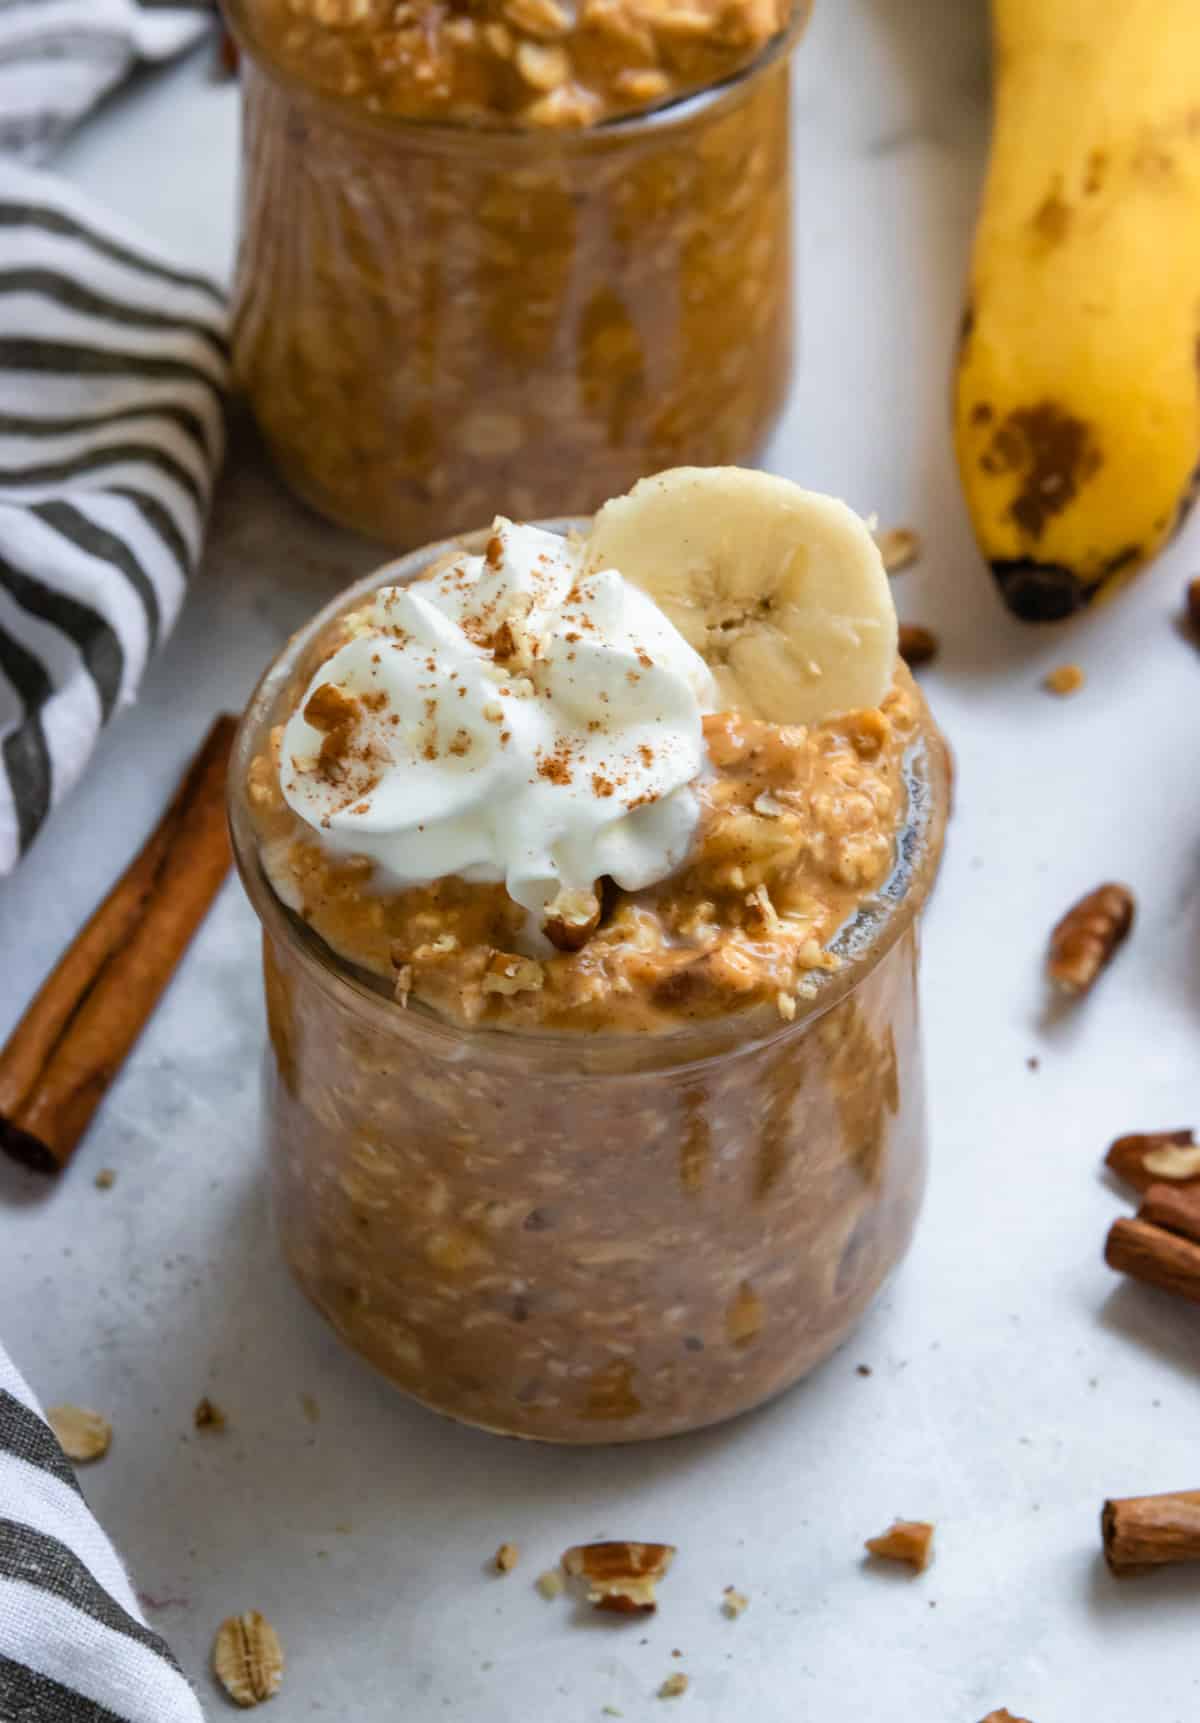 Pumpkin banana overnight oats in jars with banana slices and whipped cream.